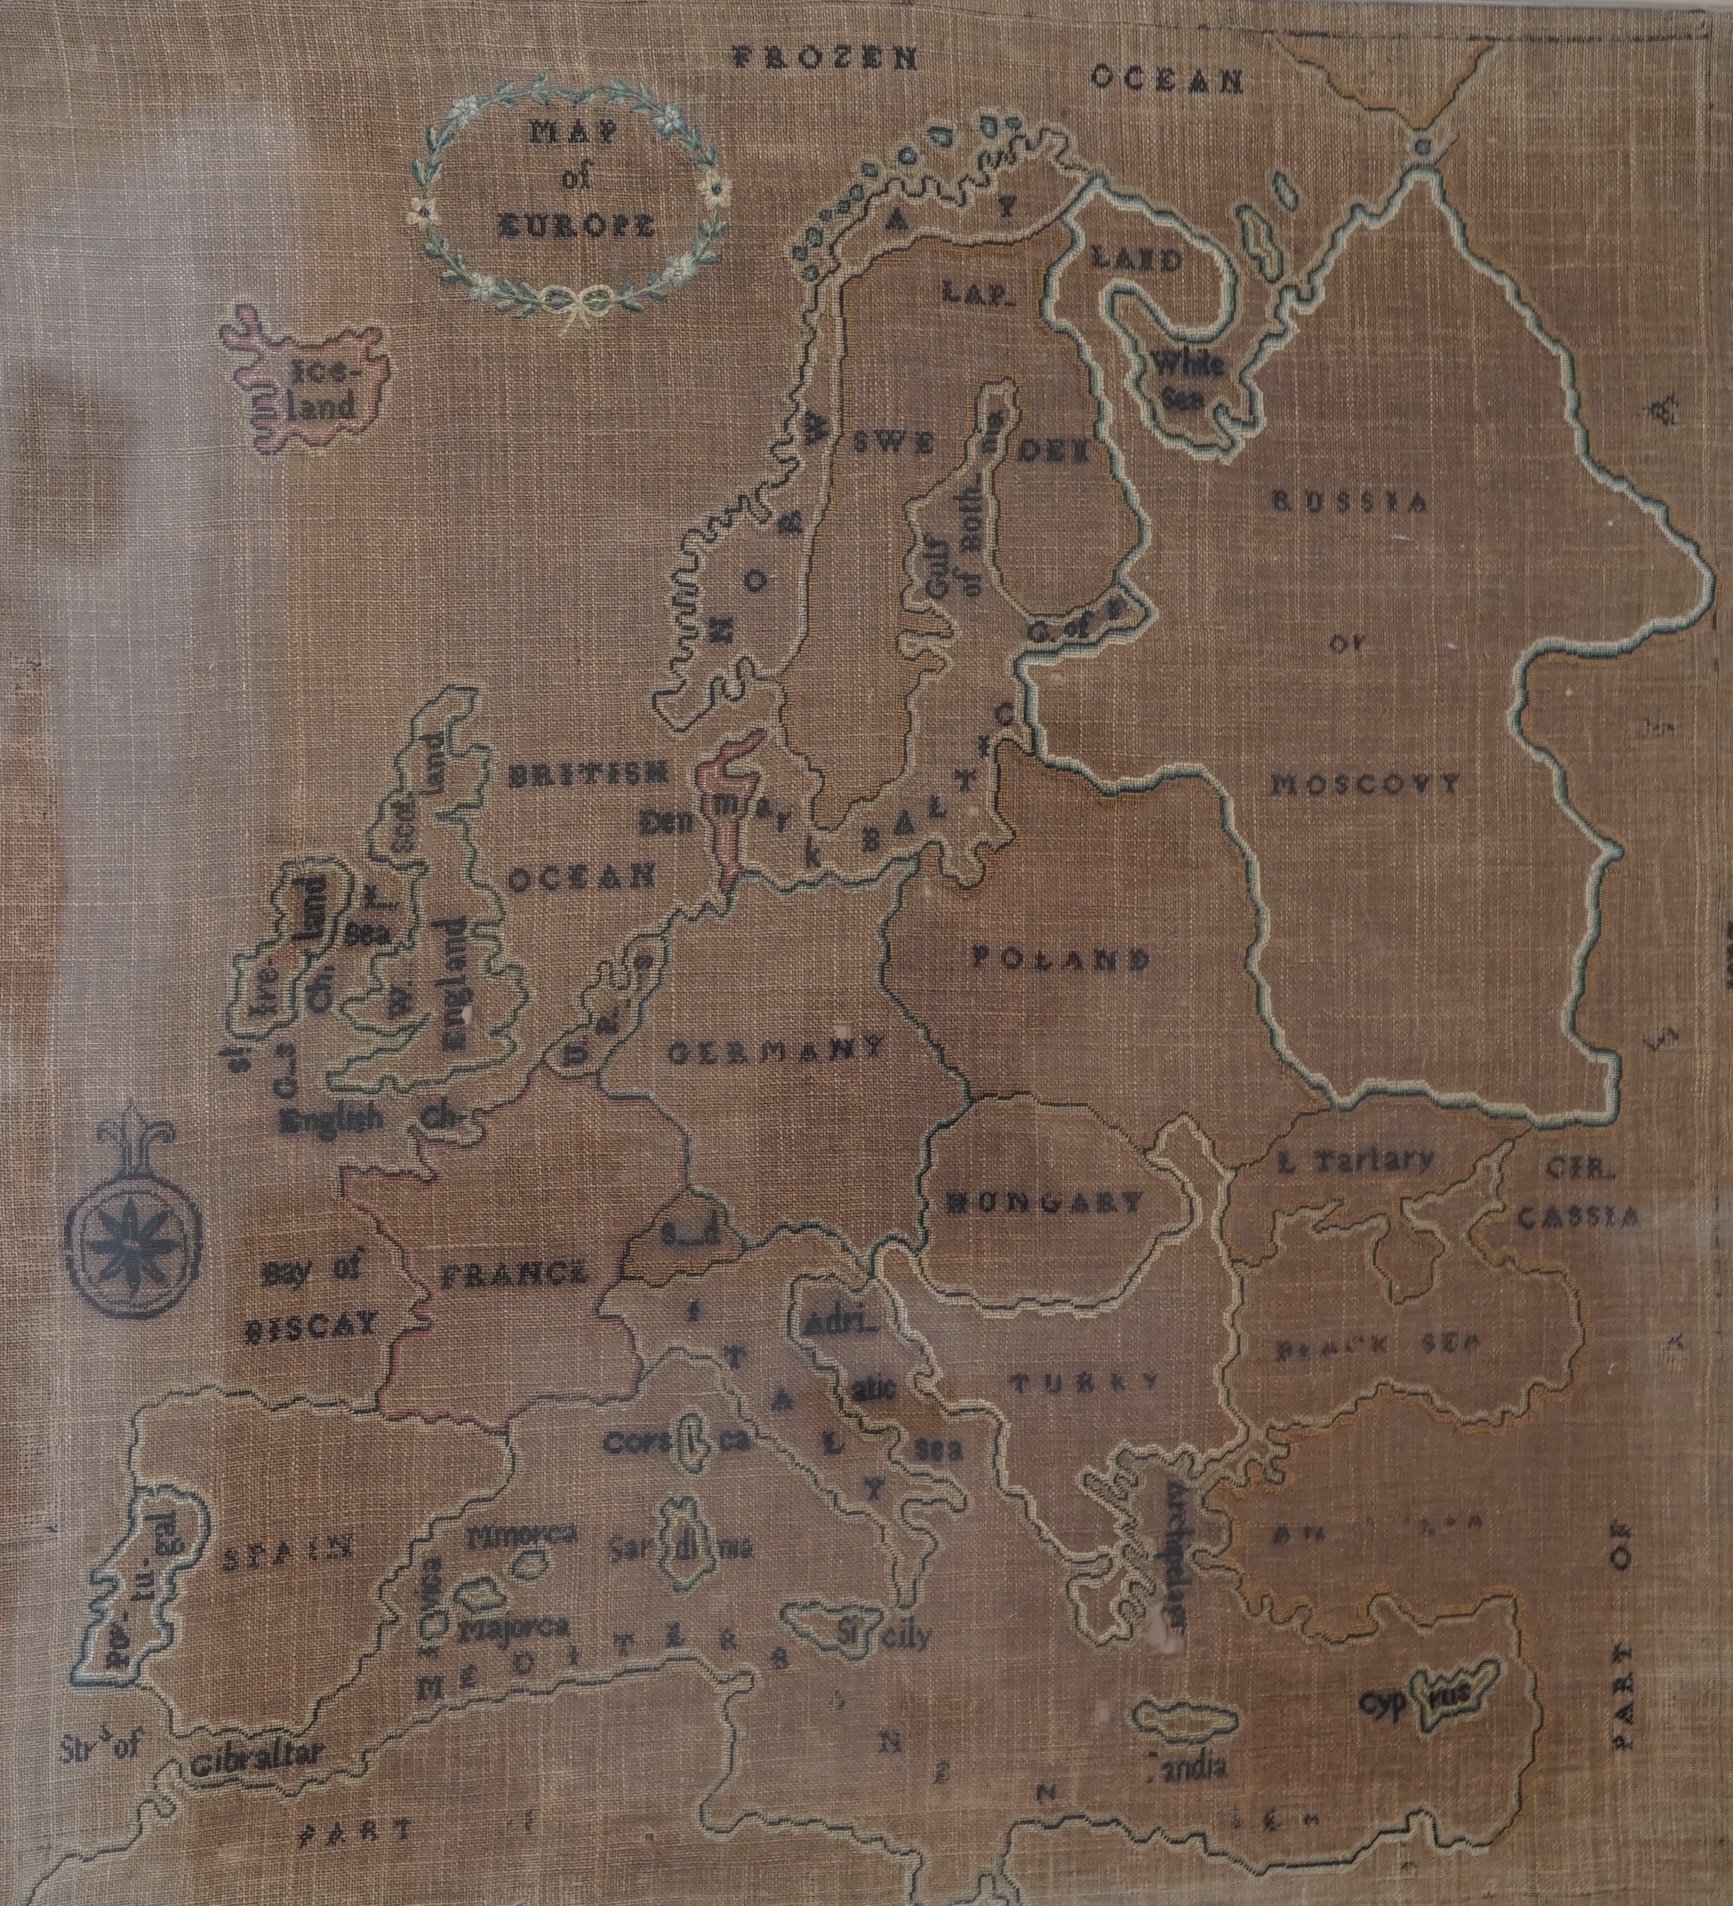 A late 19th century map sampler of Europe, linen backing discoloured by the light and sun, 46cm wide, 47.5cm high. Condition - fair, discolouration and staining